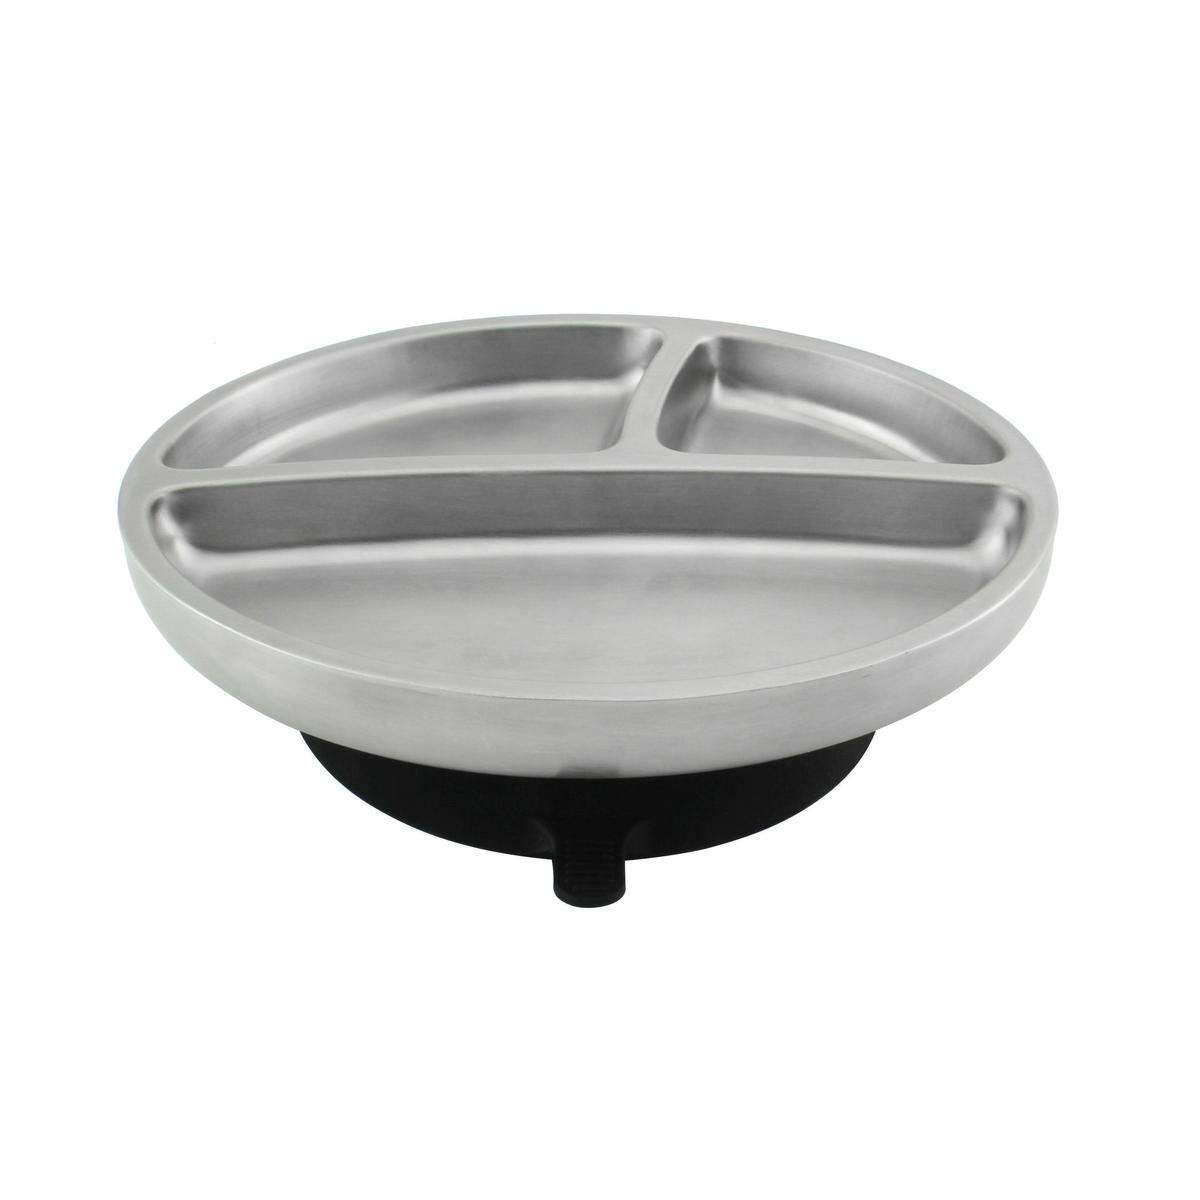 https://shopblossum.com/cdn/shop/products/black-avanchy-stainless-steel-suction-toddler-plate-avanchy-sustainable-baby-dishware-2_1200x_02844ebf-330e-4567-8db4-ad0ada98f923_2048x.jpg?v=1552264448